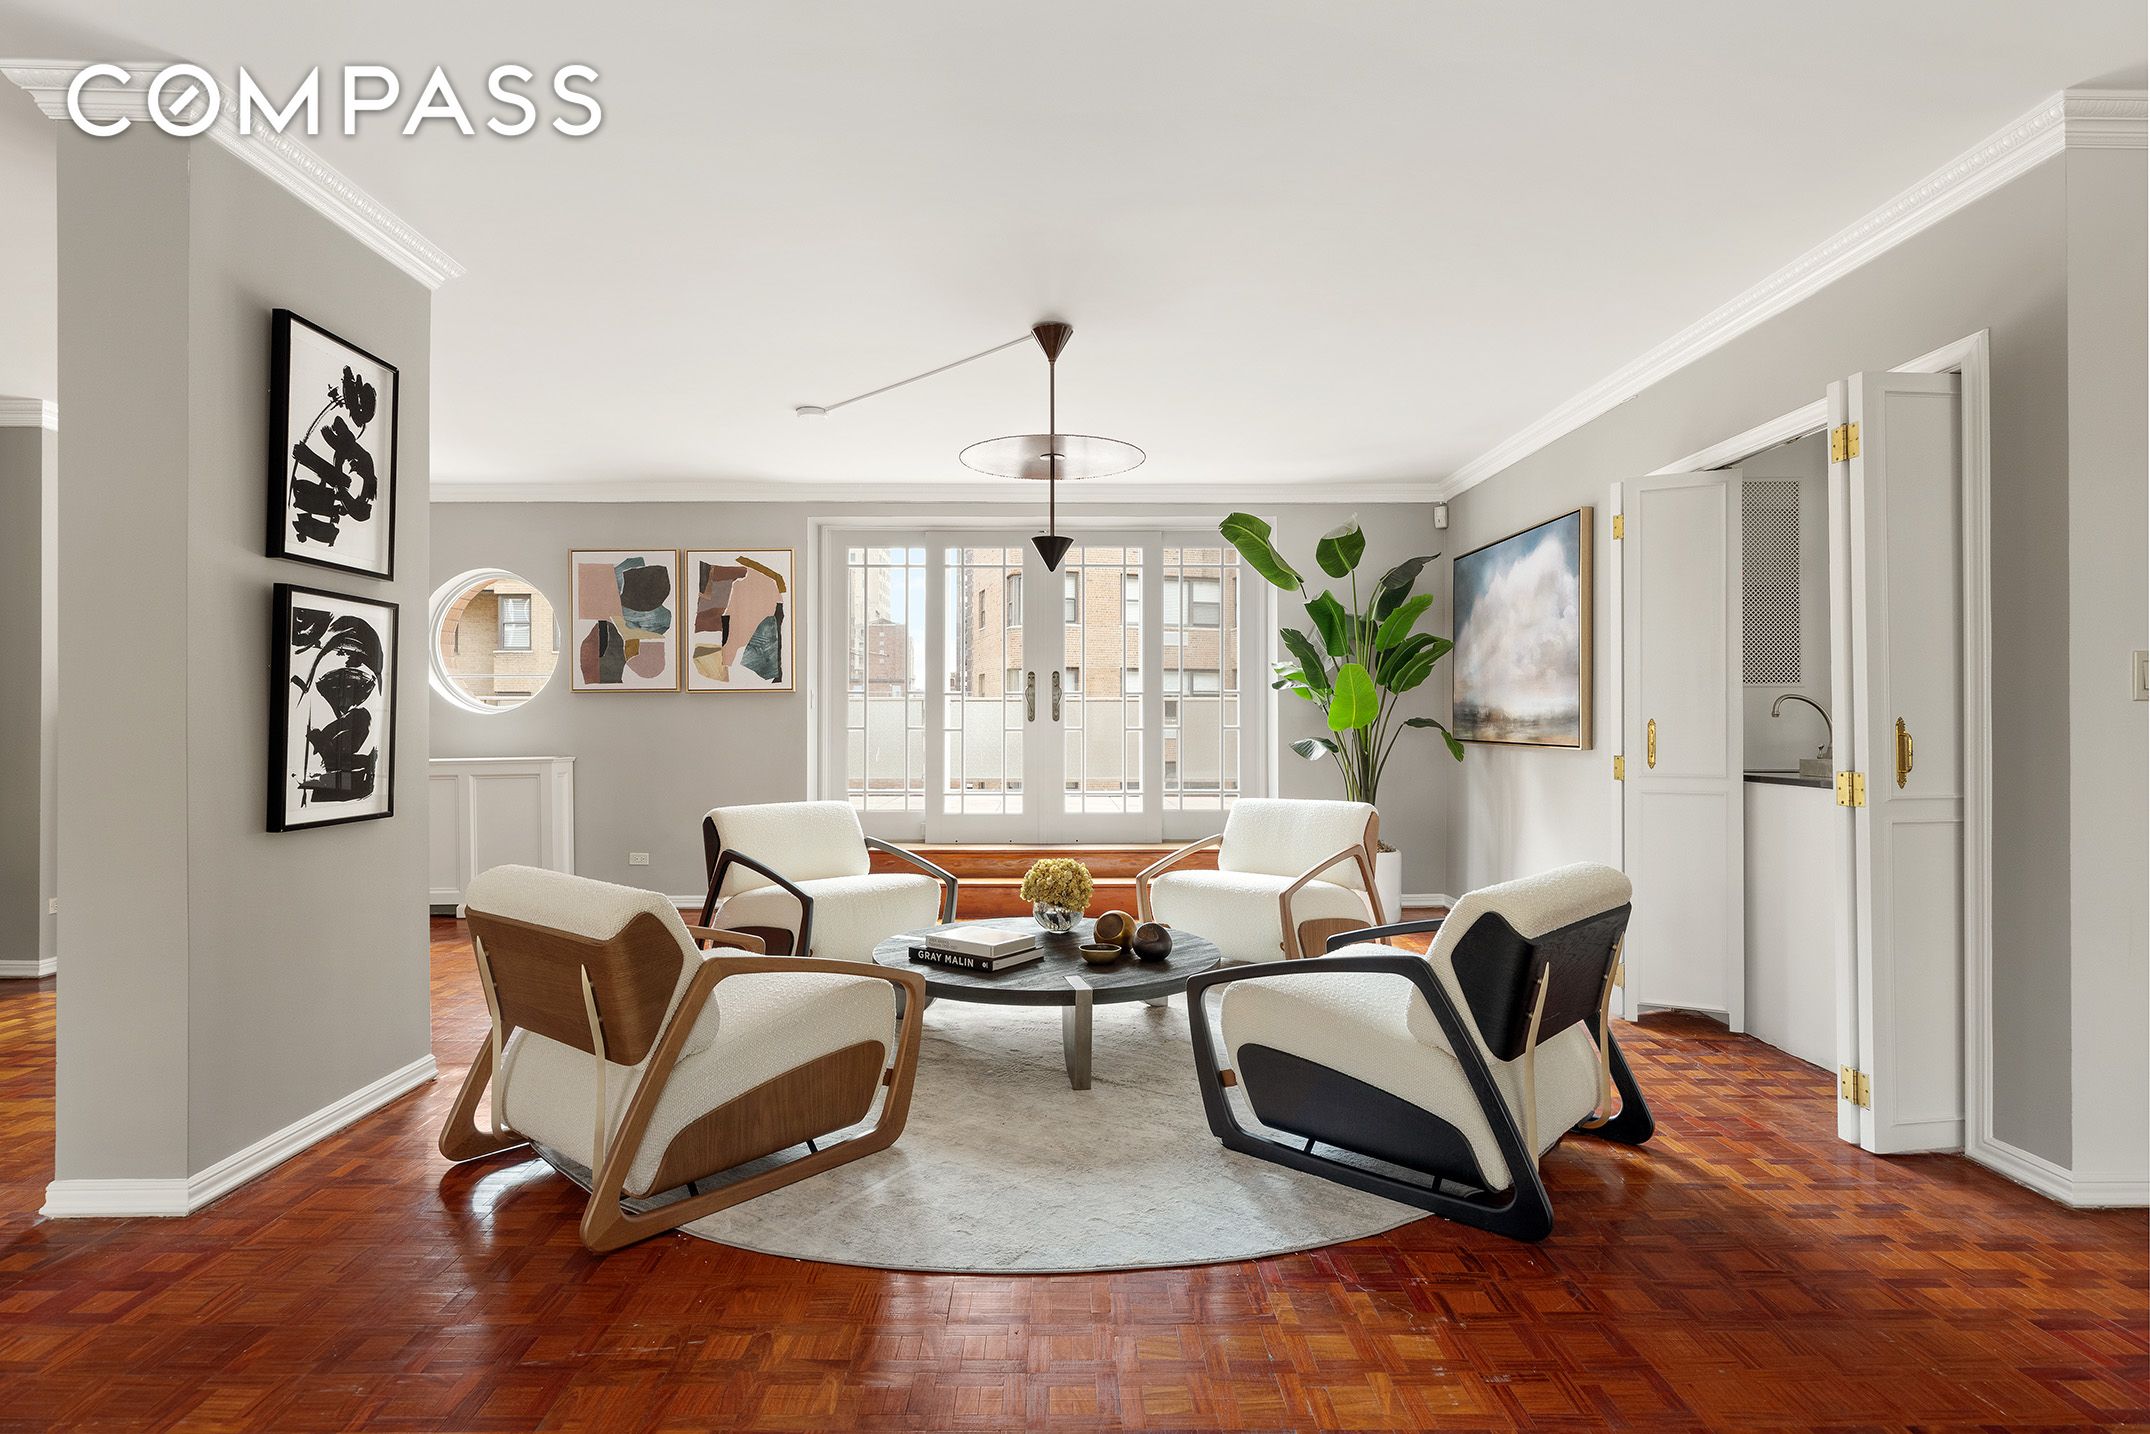 433 East 56th Street 10Ab, Sutton Place, Midtown East, NYC - 5 Bedrooms  
6 Bathrooms  
10 Rooms - 